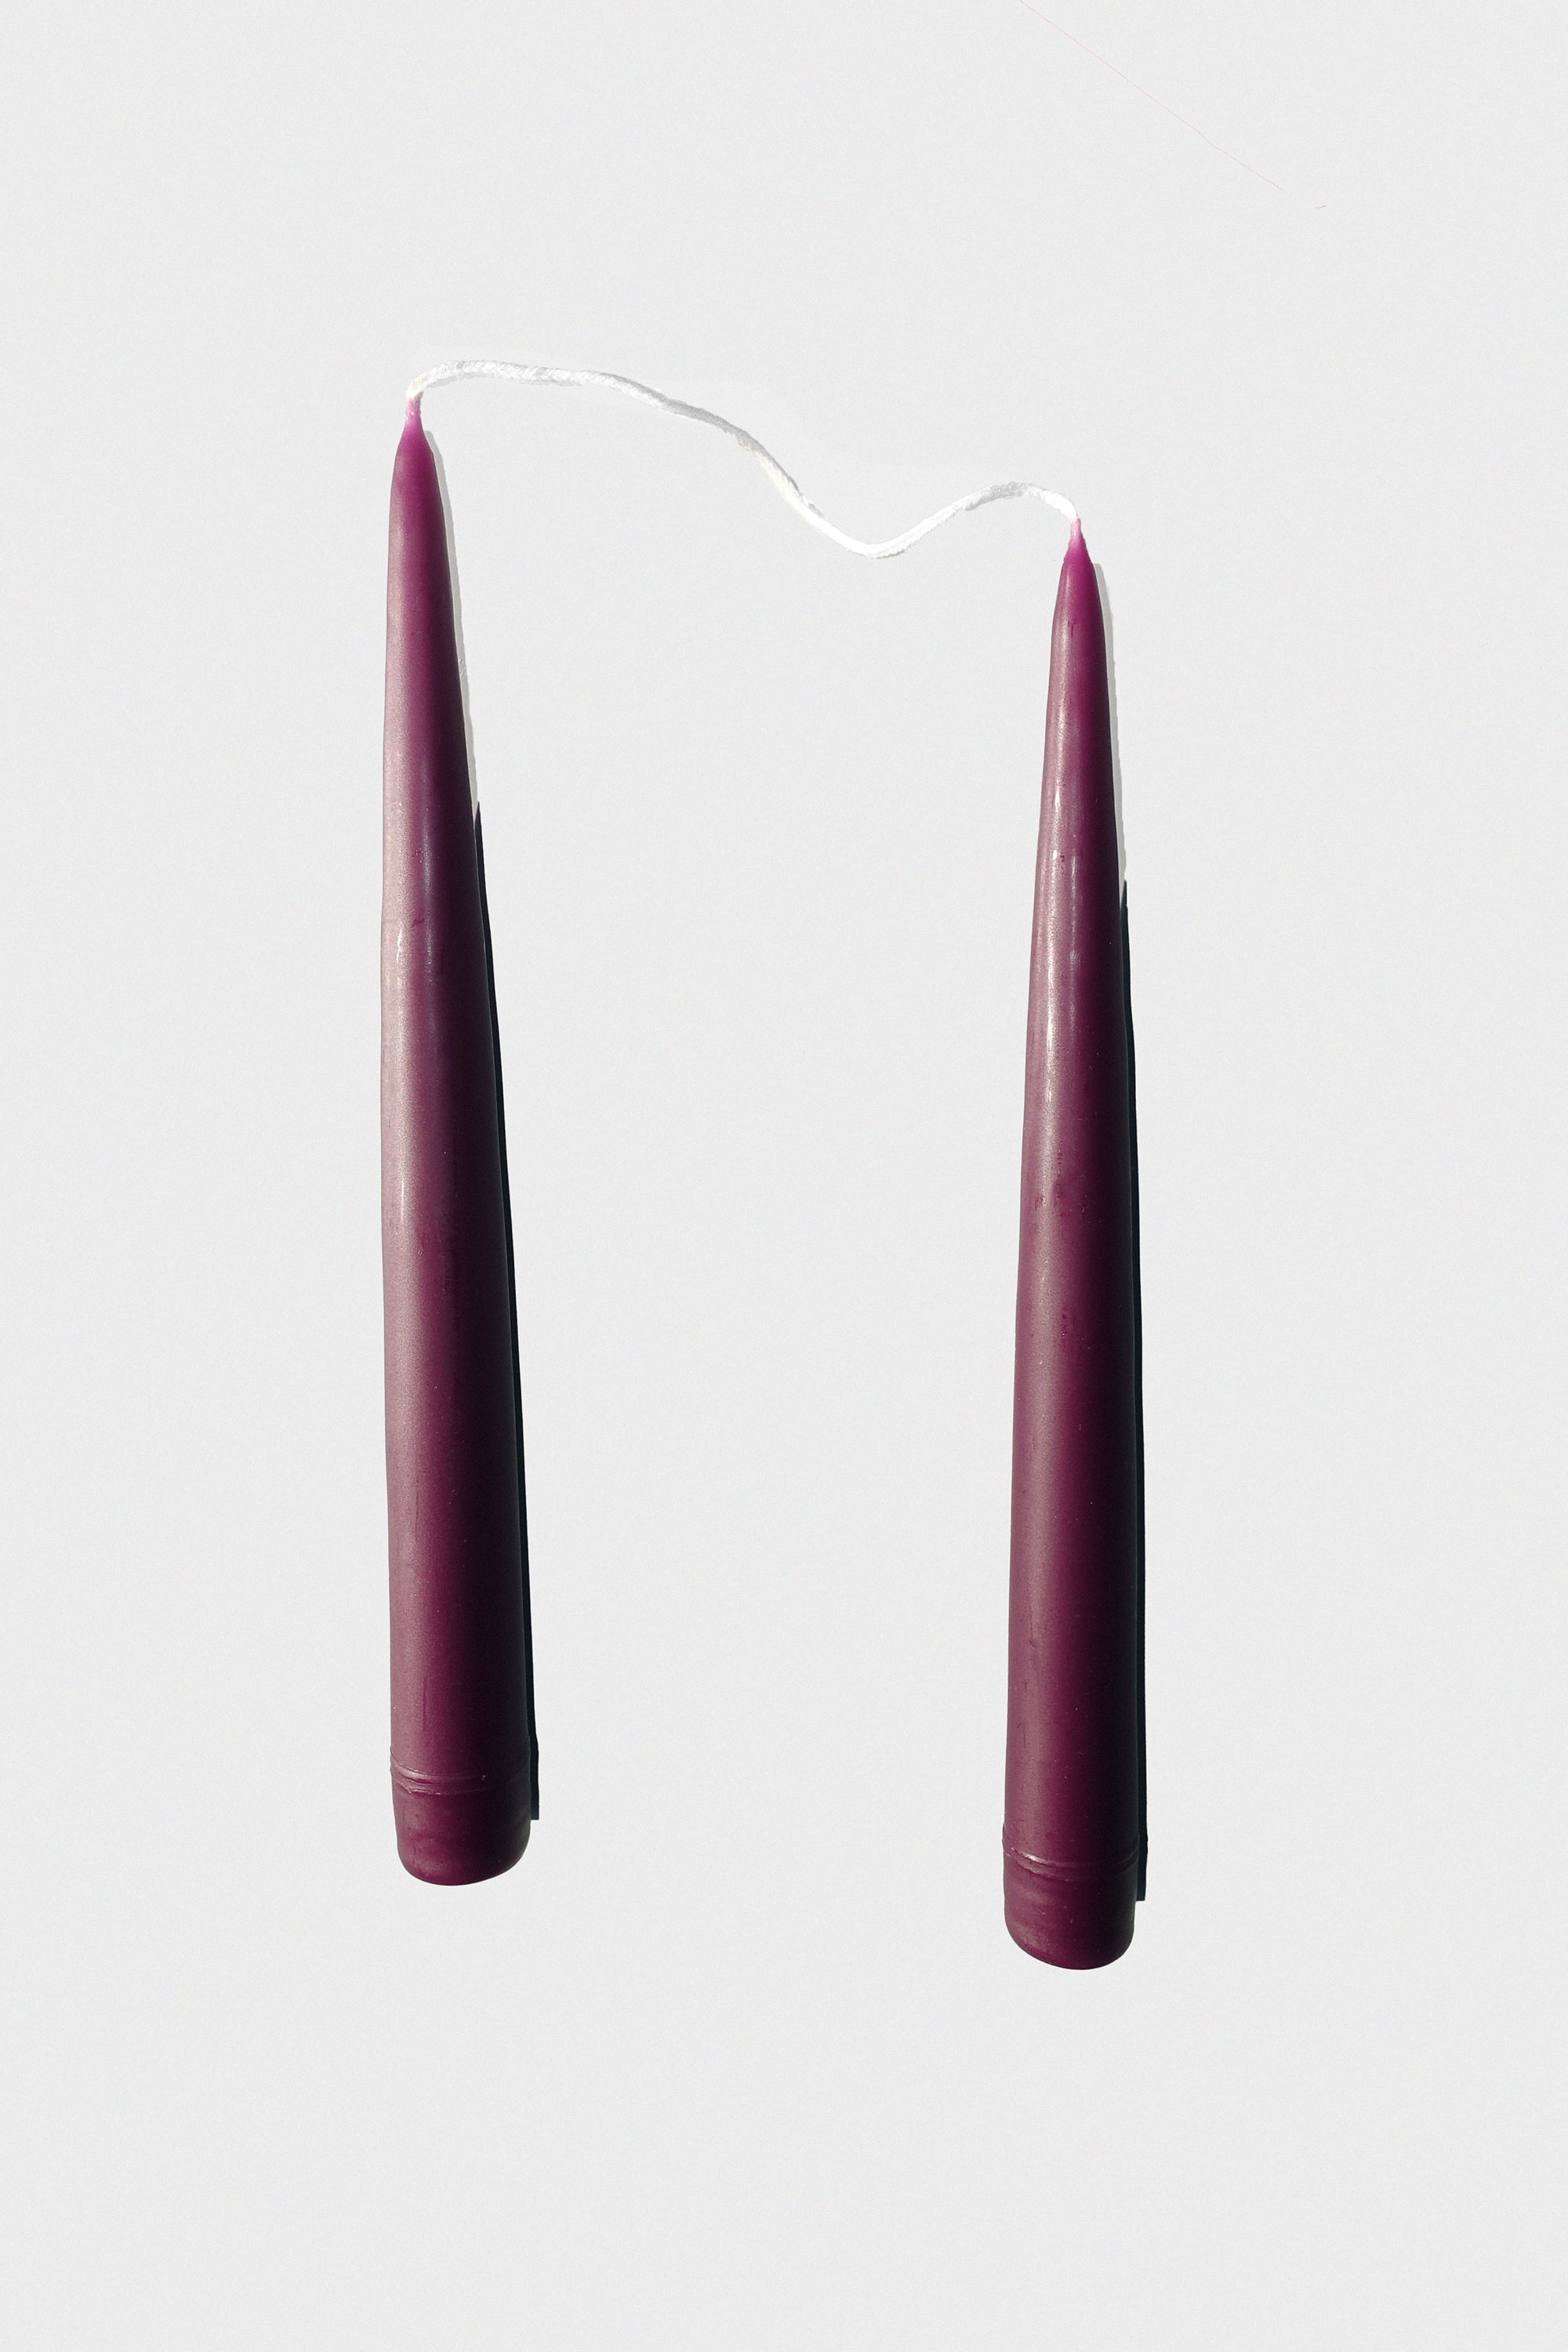 09" Taper Candles in Plum